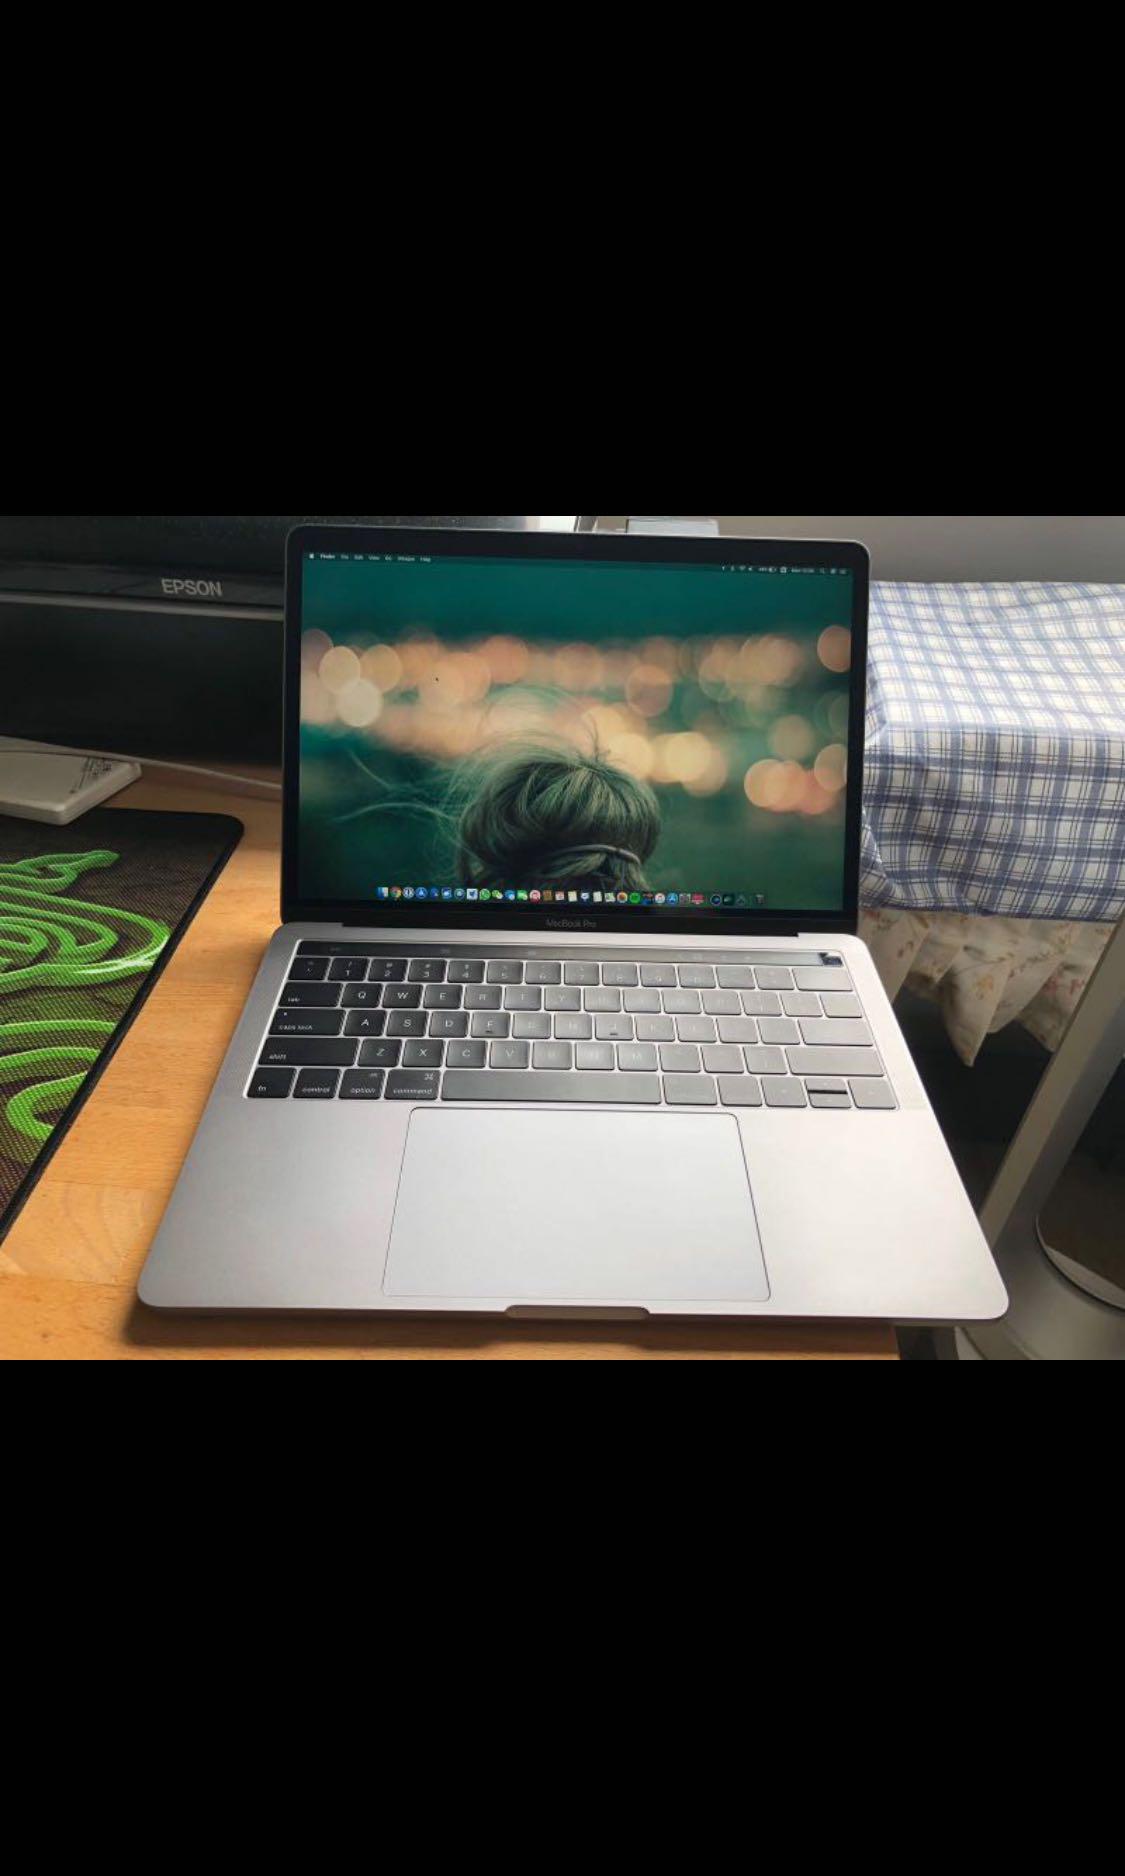 Macbook Pro 13 Inch Late 16 Four Thunderbolt 3 Ports Electronics Computers Laptops On Carousell